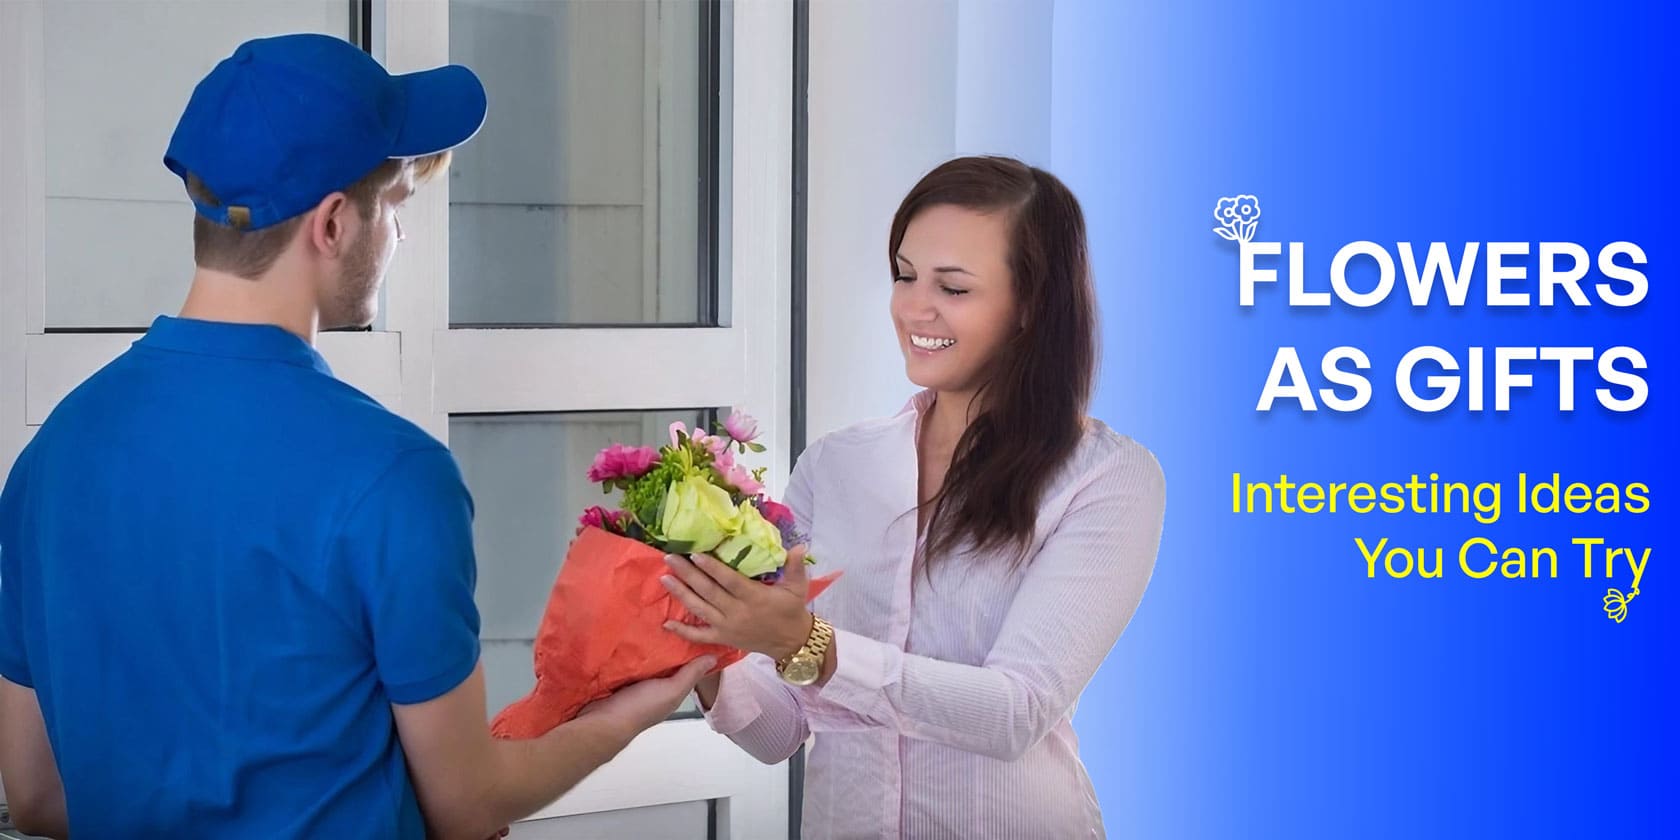 Affordable Flower Delivery Service: Top Gift Ideas in 2023